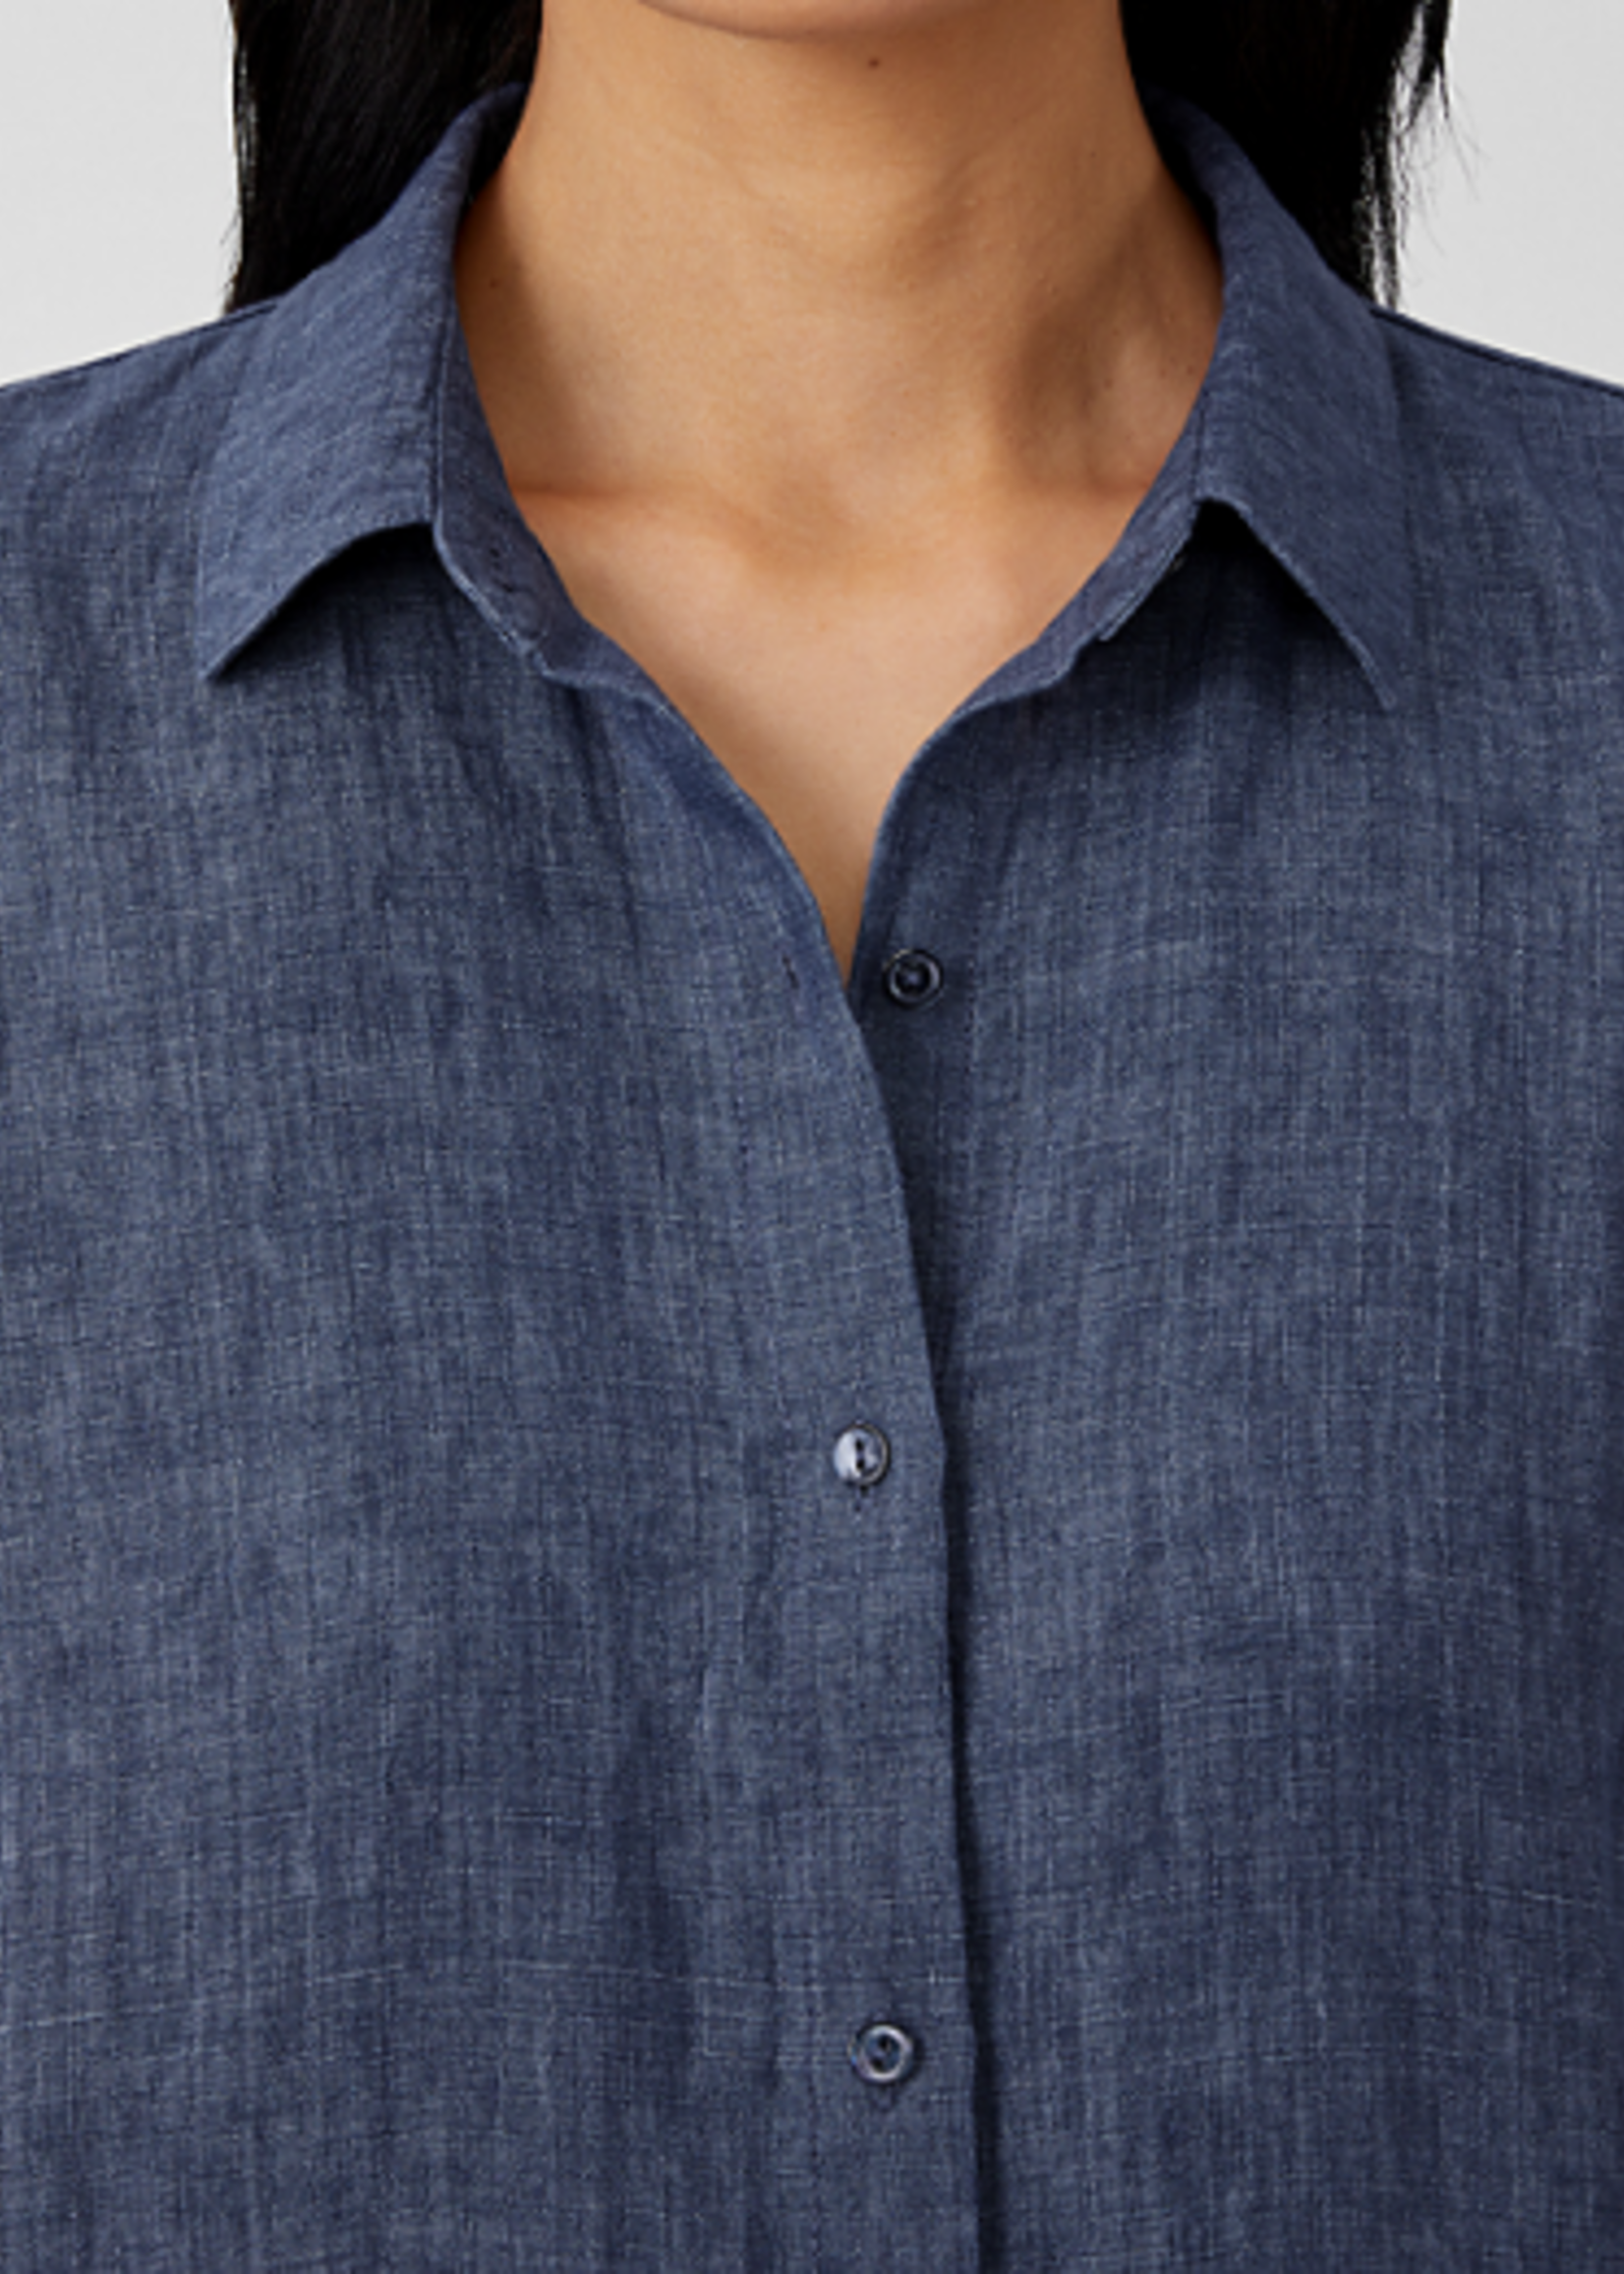 Eileen Fisher Washed Organic Linen Delave Classic Collar Shirt